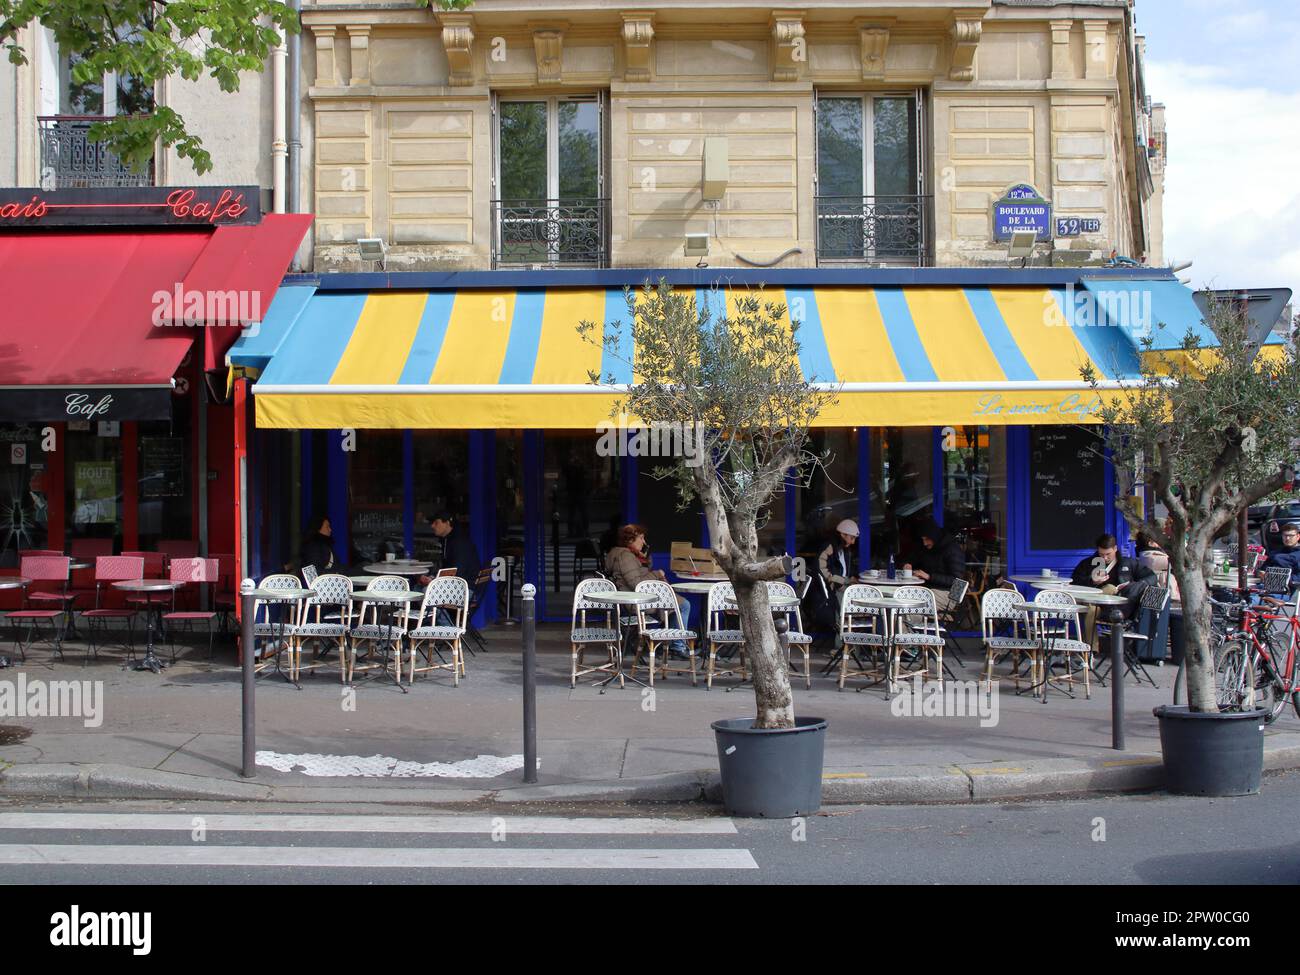 Corner view of a typical Parisian restaurant bar here located on the Boulevard de la Bastille in the 12th arrondissement of Paris France Stock Photo